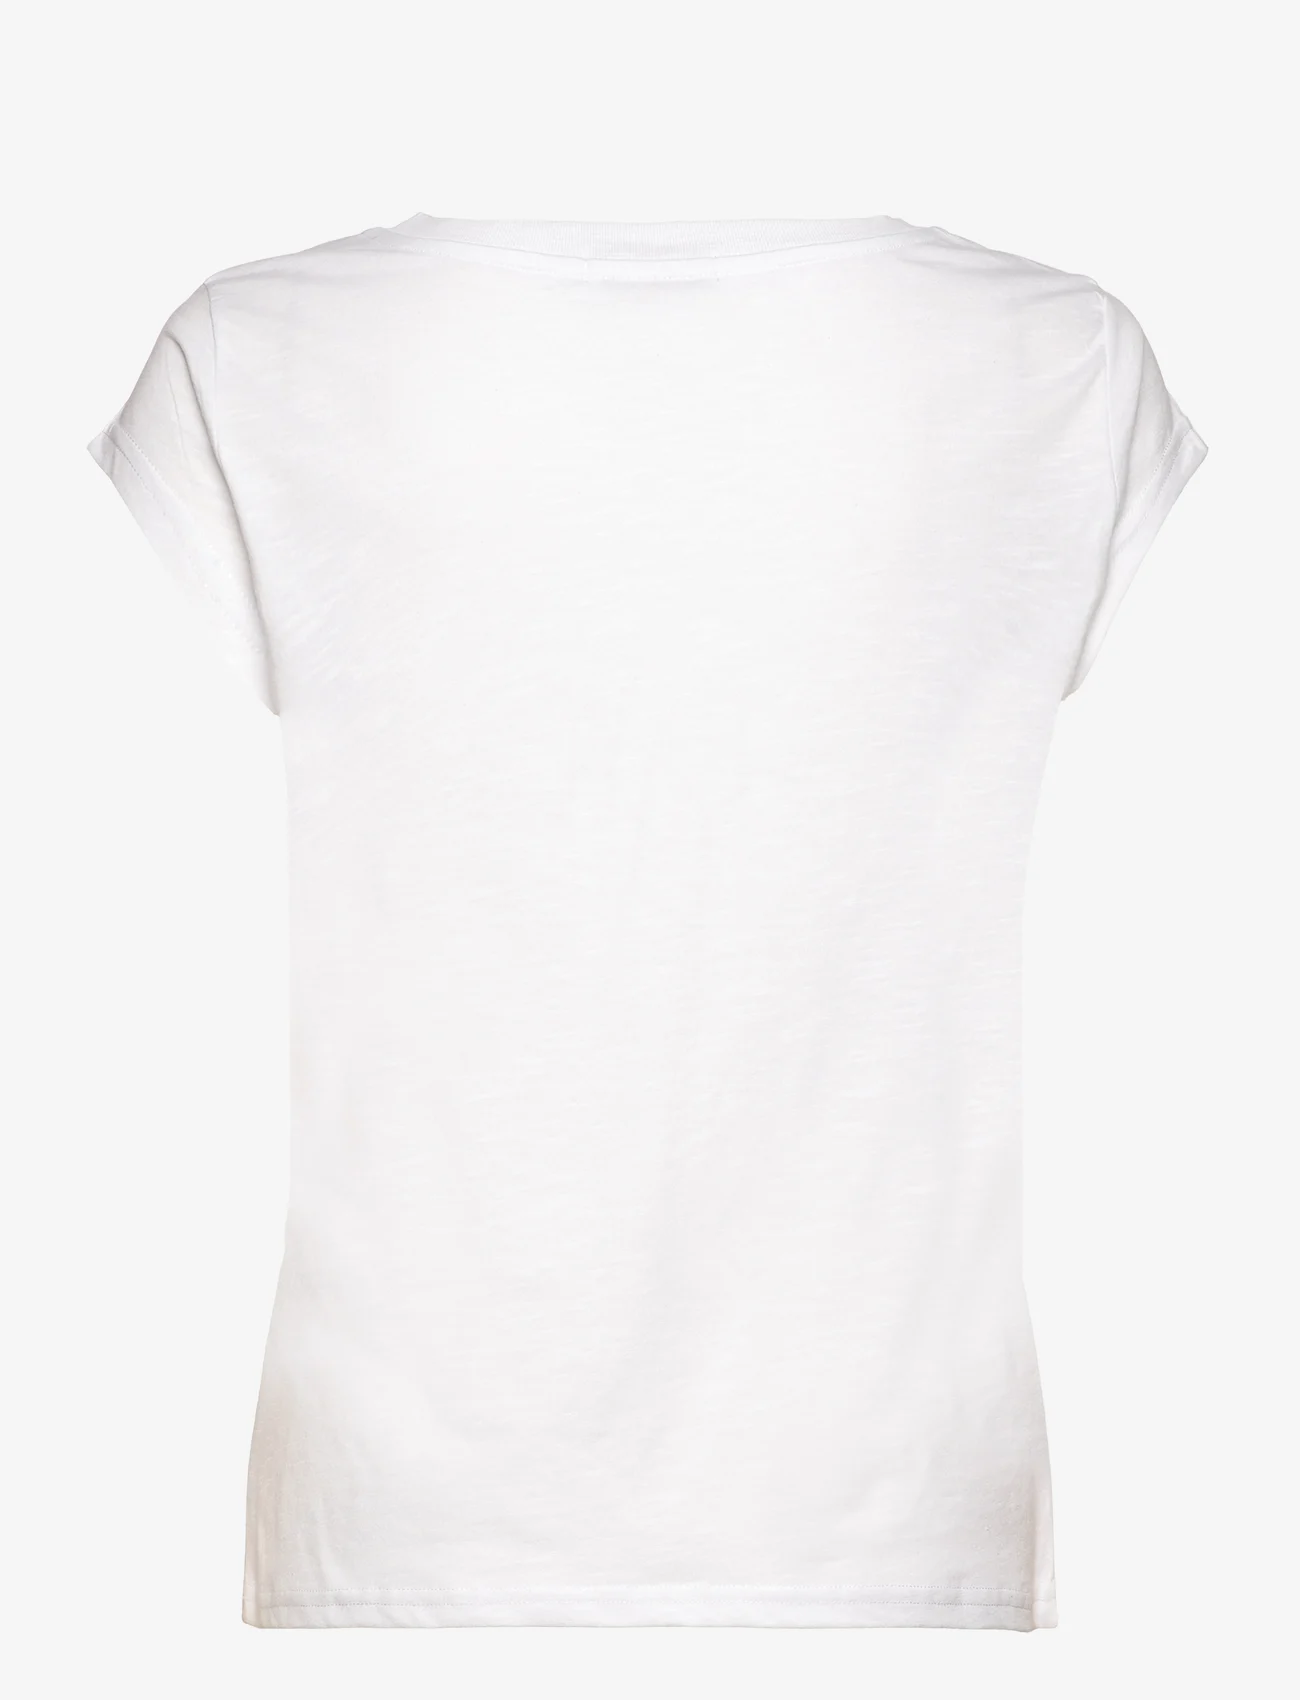 Coster Copenhagen - T-shirt with Coster print - Cap sle - t-shirts - white - 1